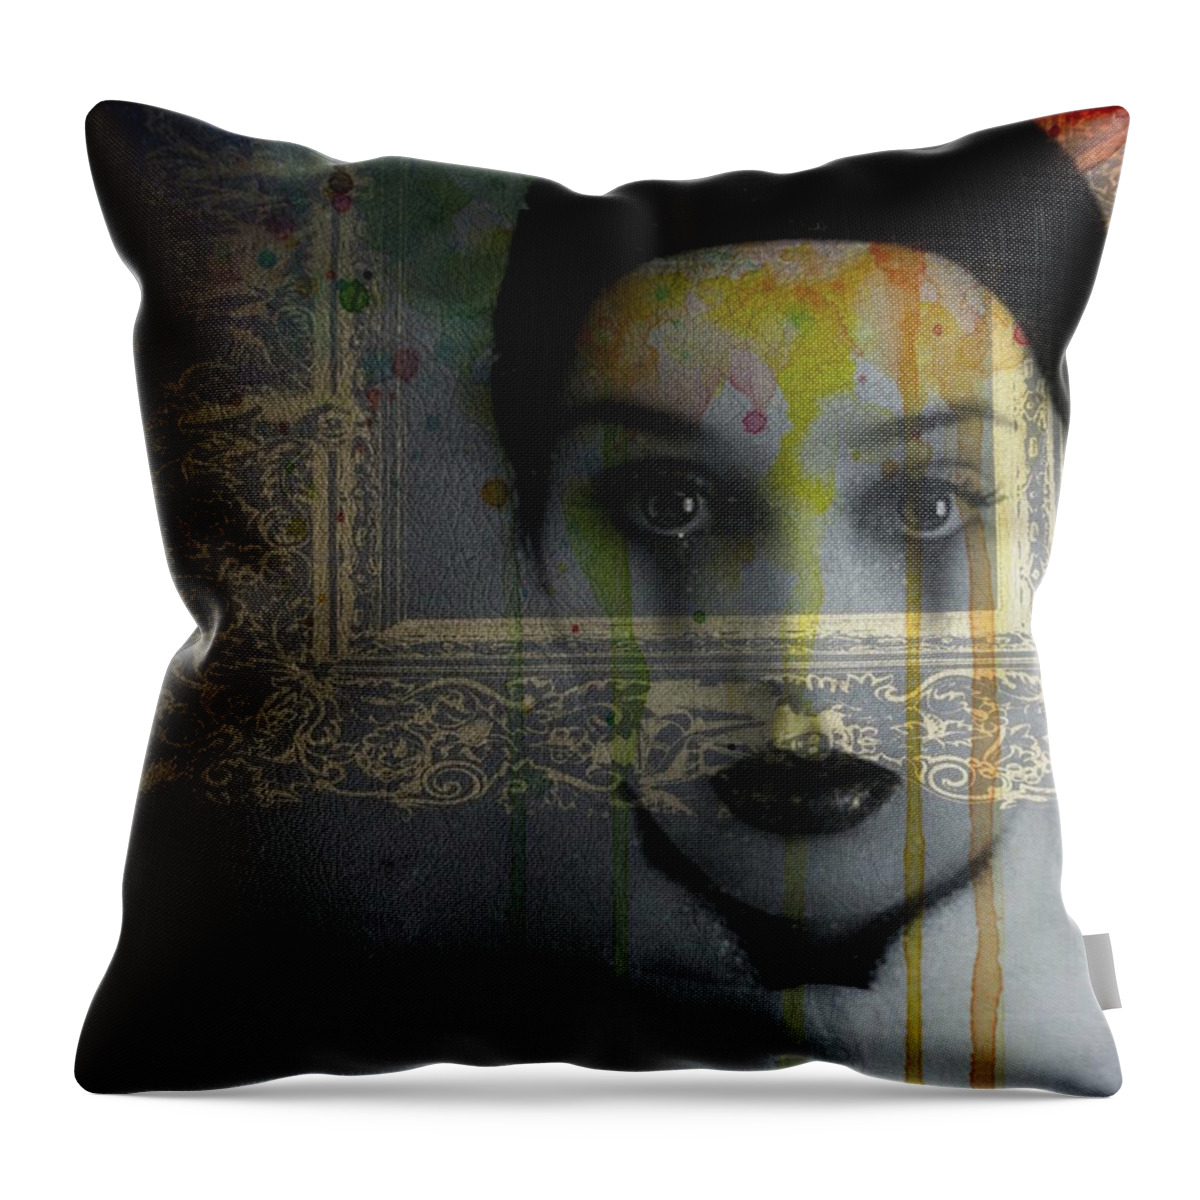 Madonna Throw Pillow featuring the mixed media Don't Cry For Me Argentina by Paul Lovering